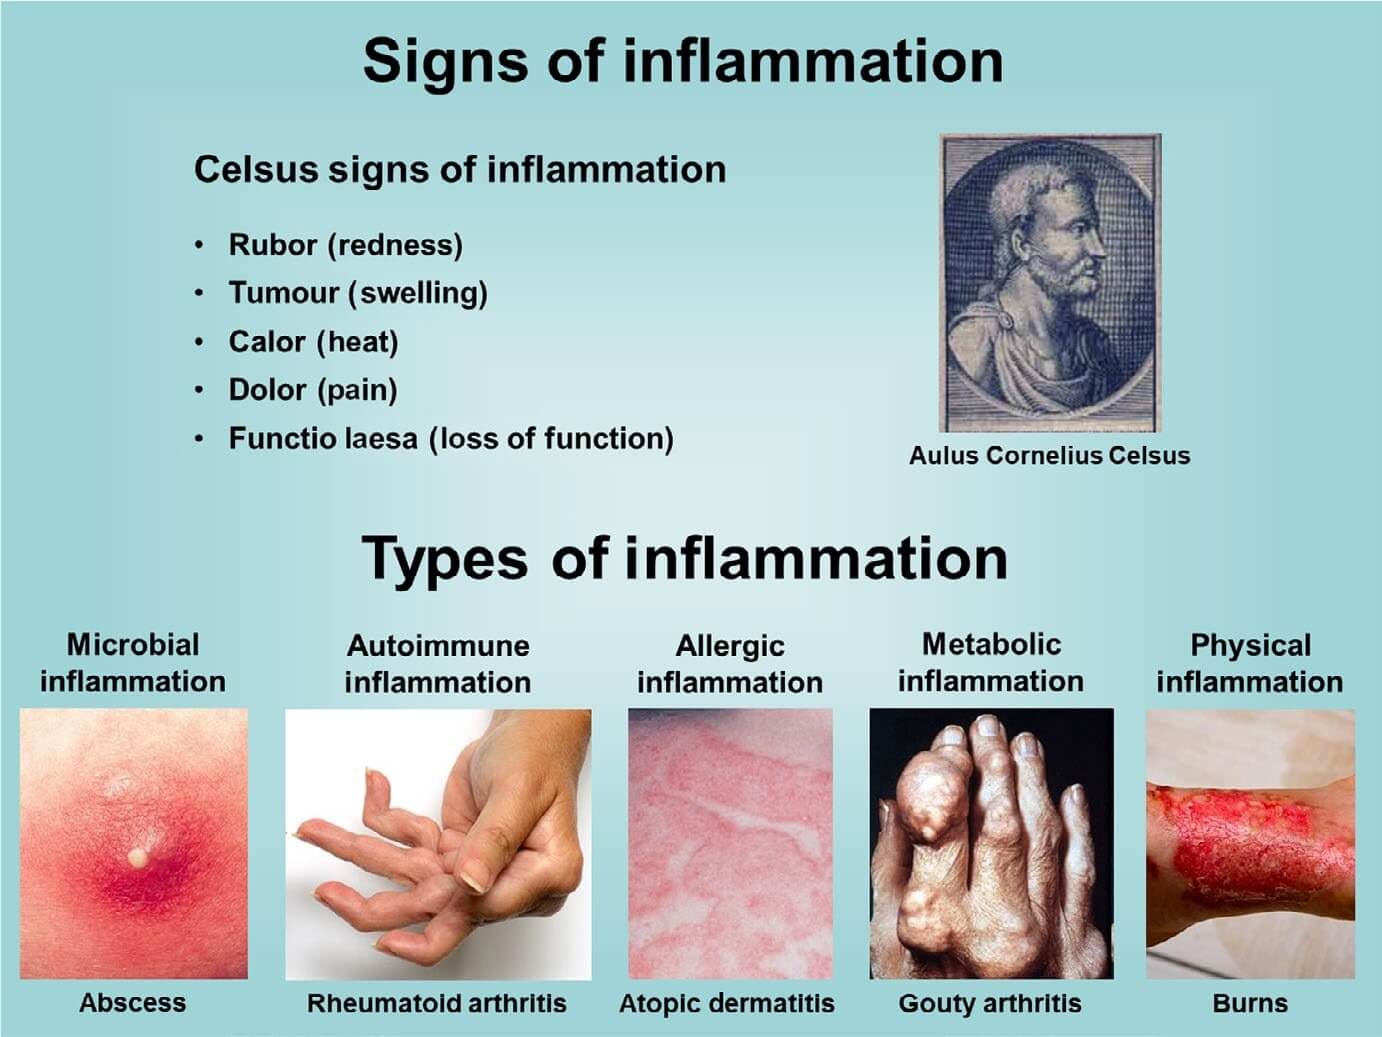 Signs and types of inflammation.